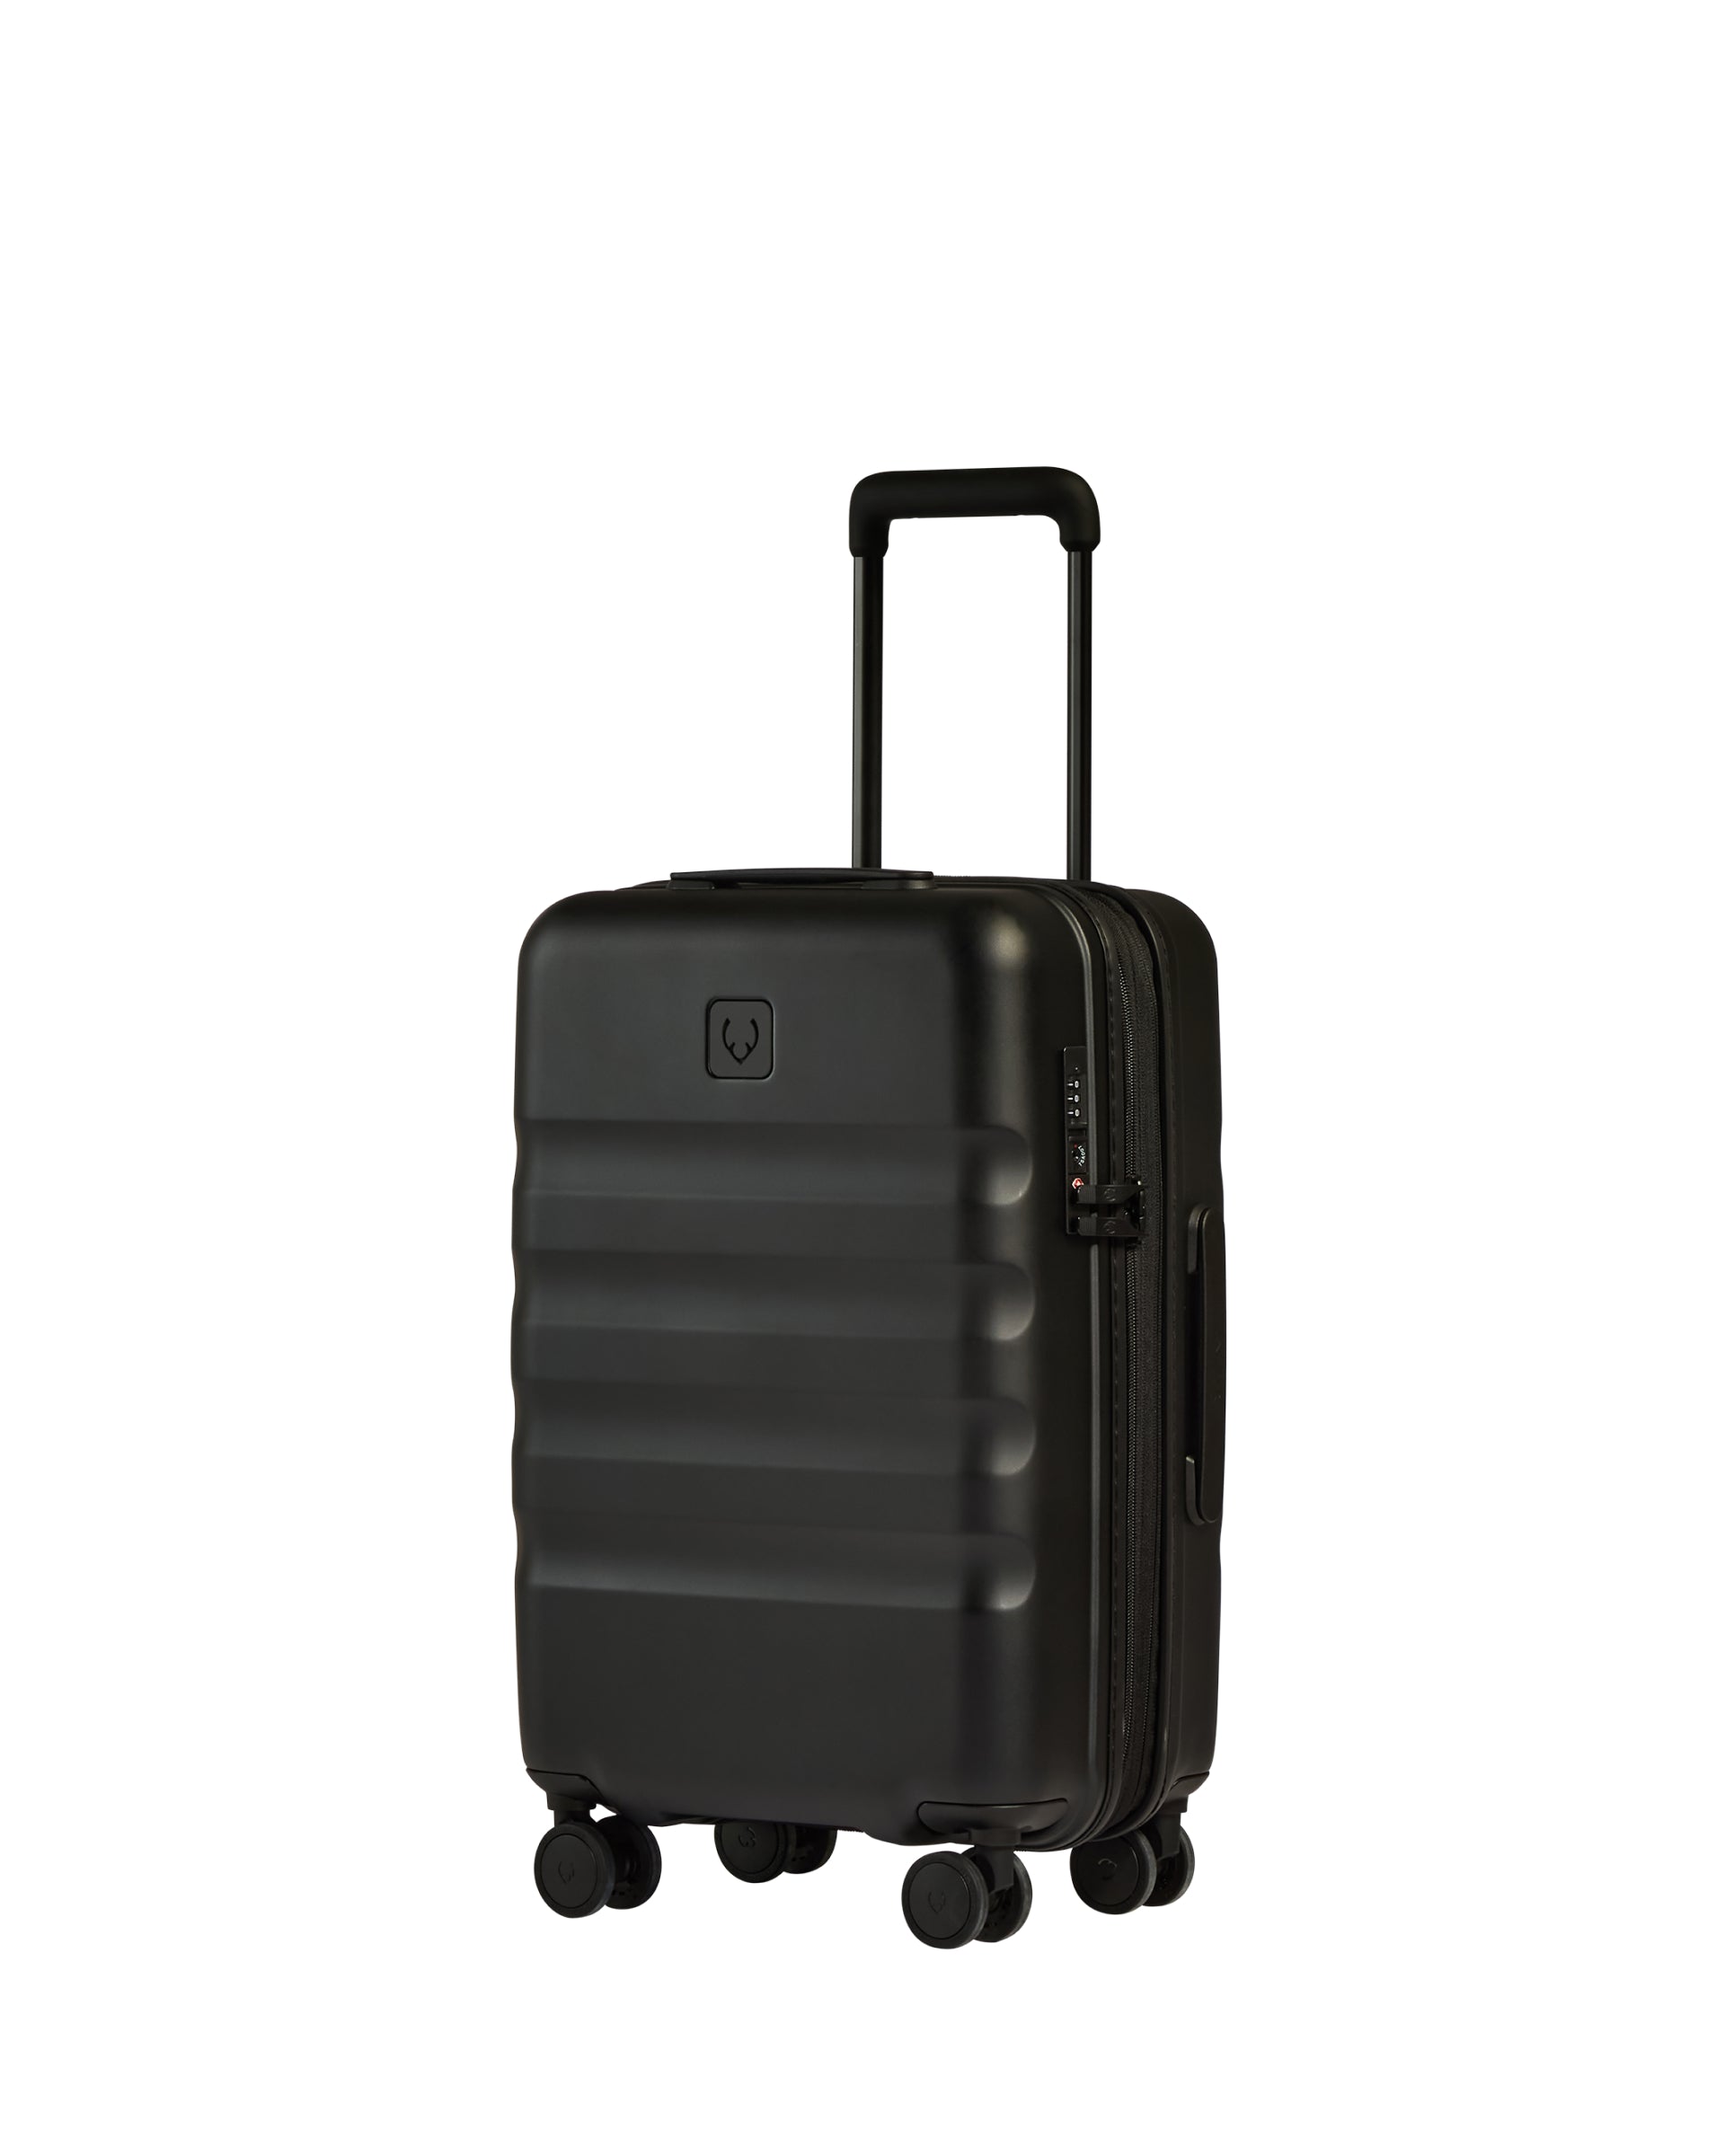 View Antler Icon Stripe Cabin Suitcase With Expander In Black Size 23cm x 55cm x 36cm information